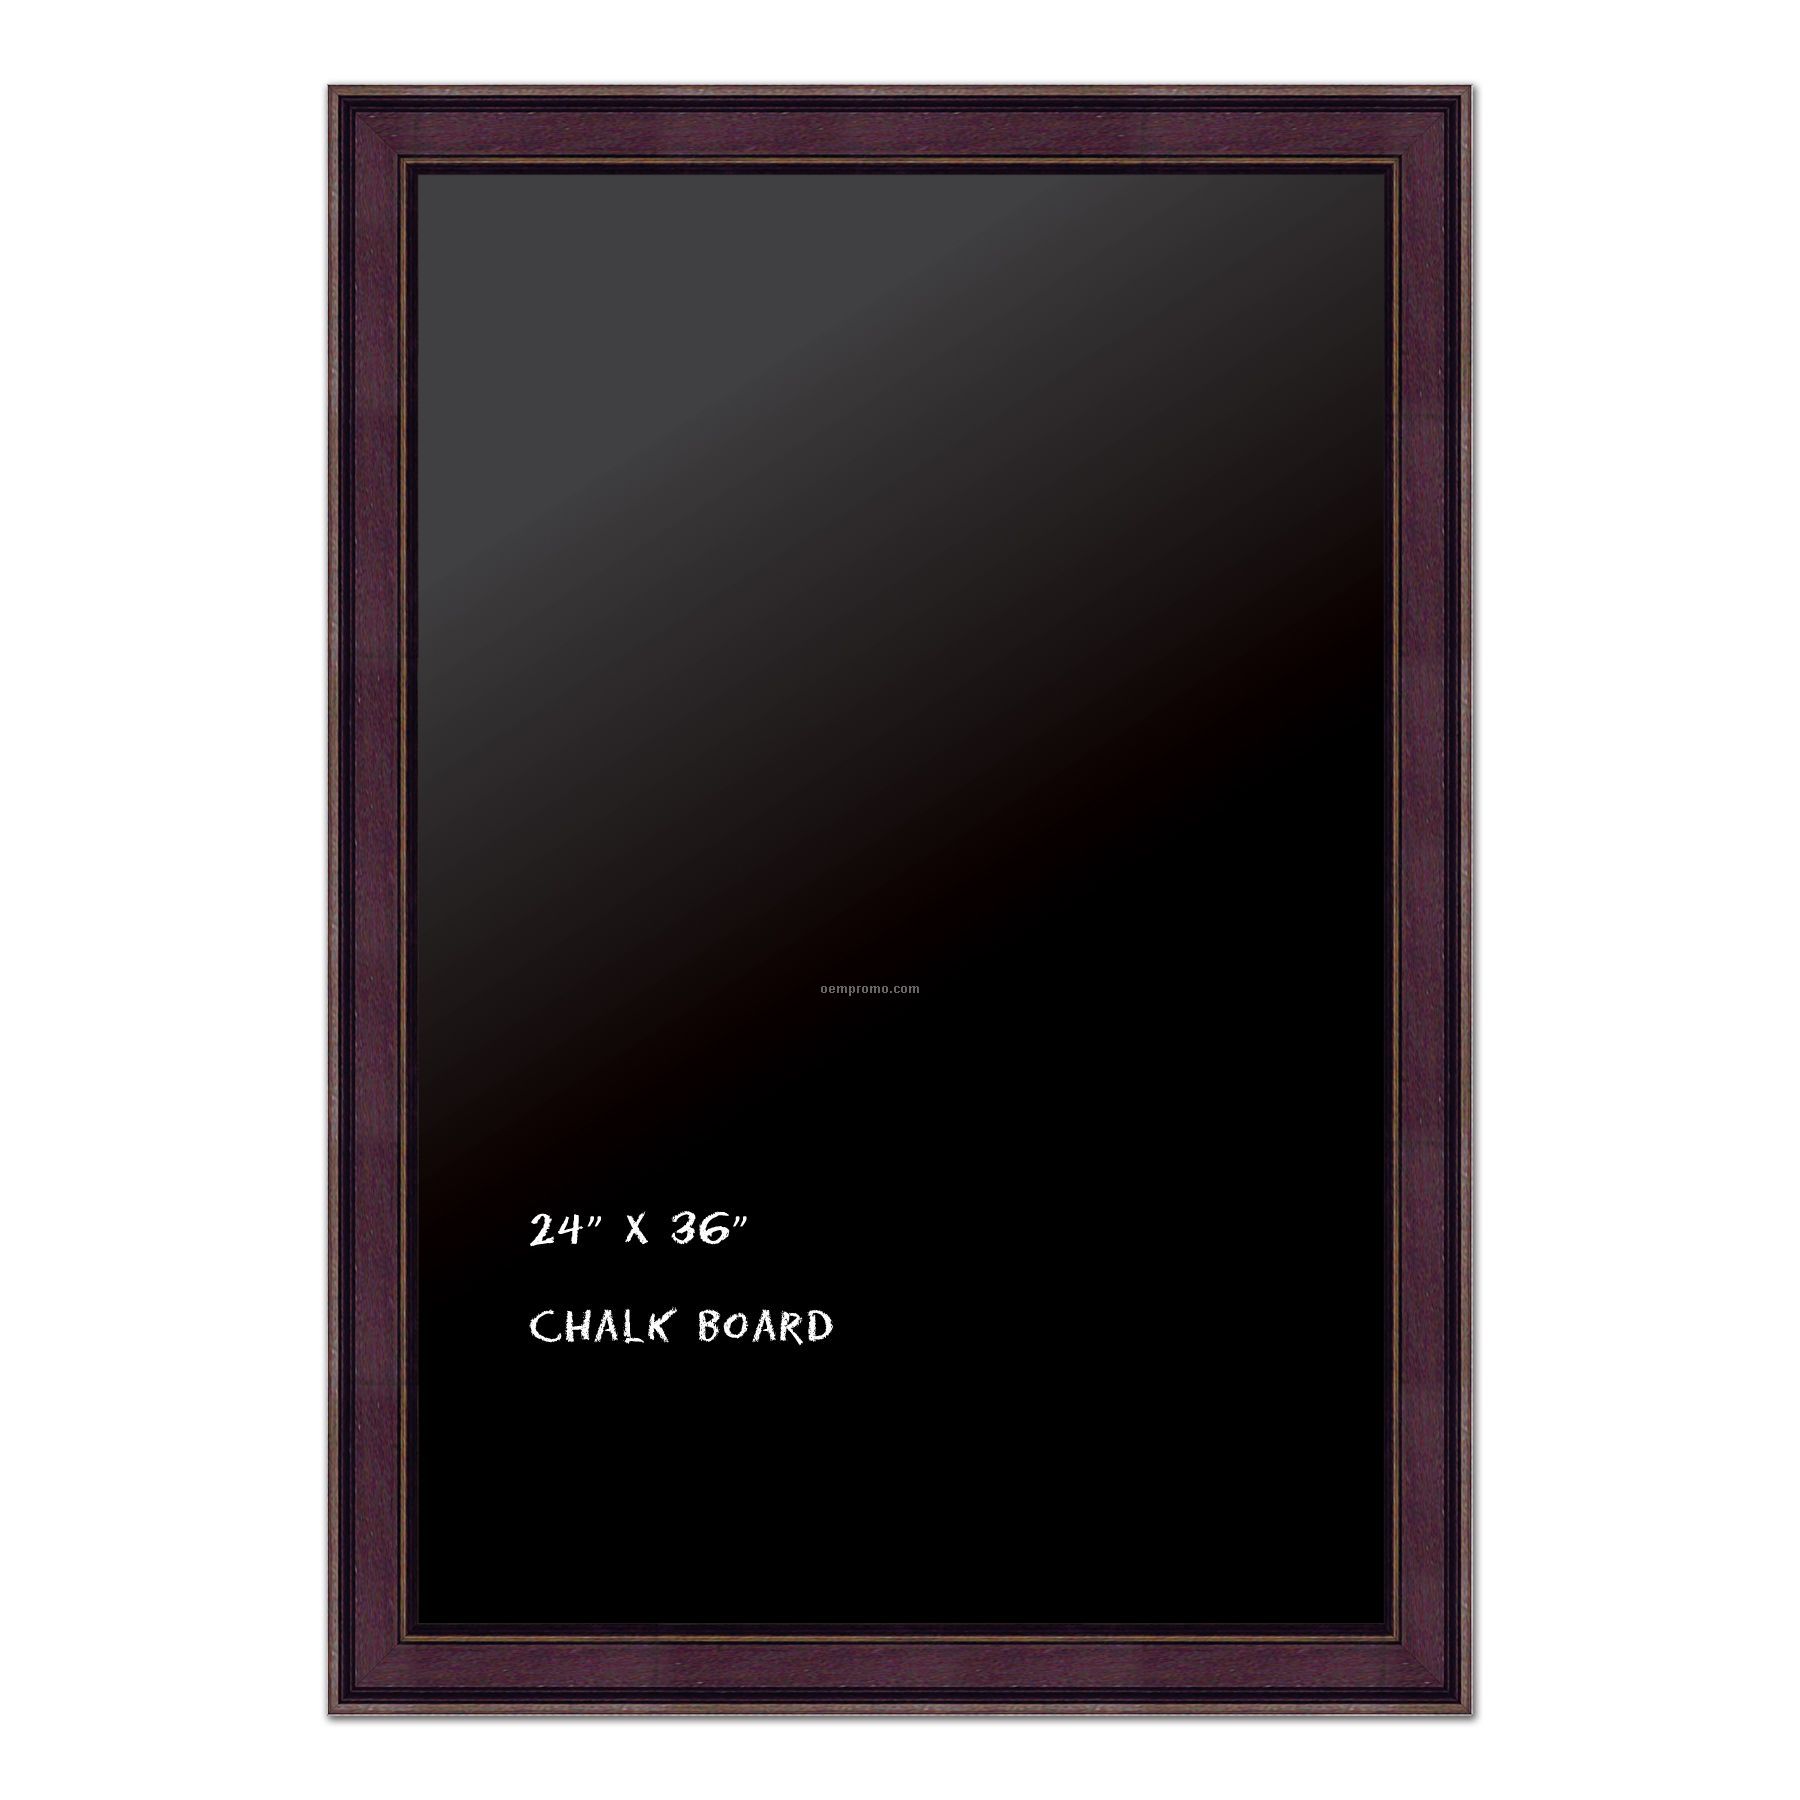 Chalk Board 24" X 36". Real Wood Frame - Country Wine Finish.